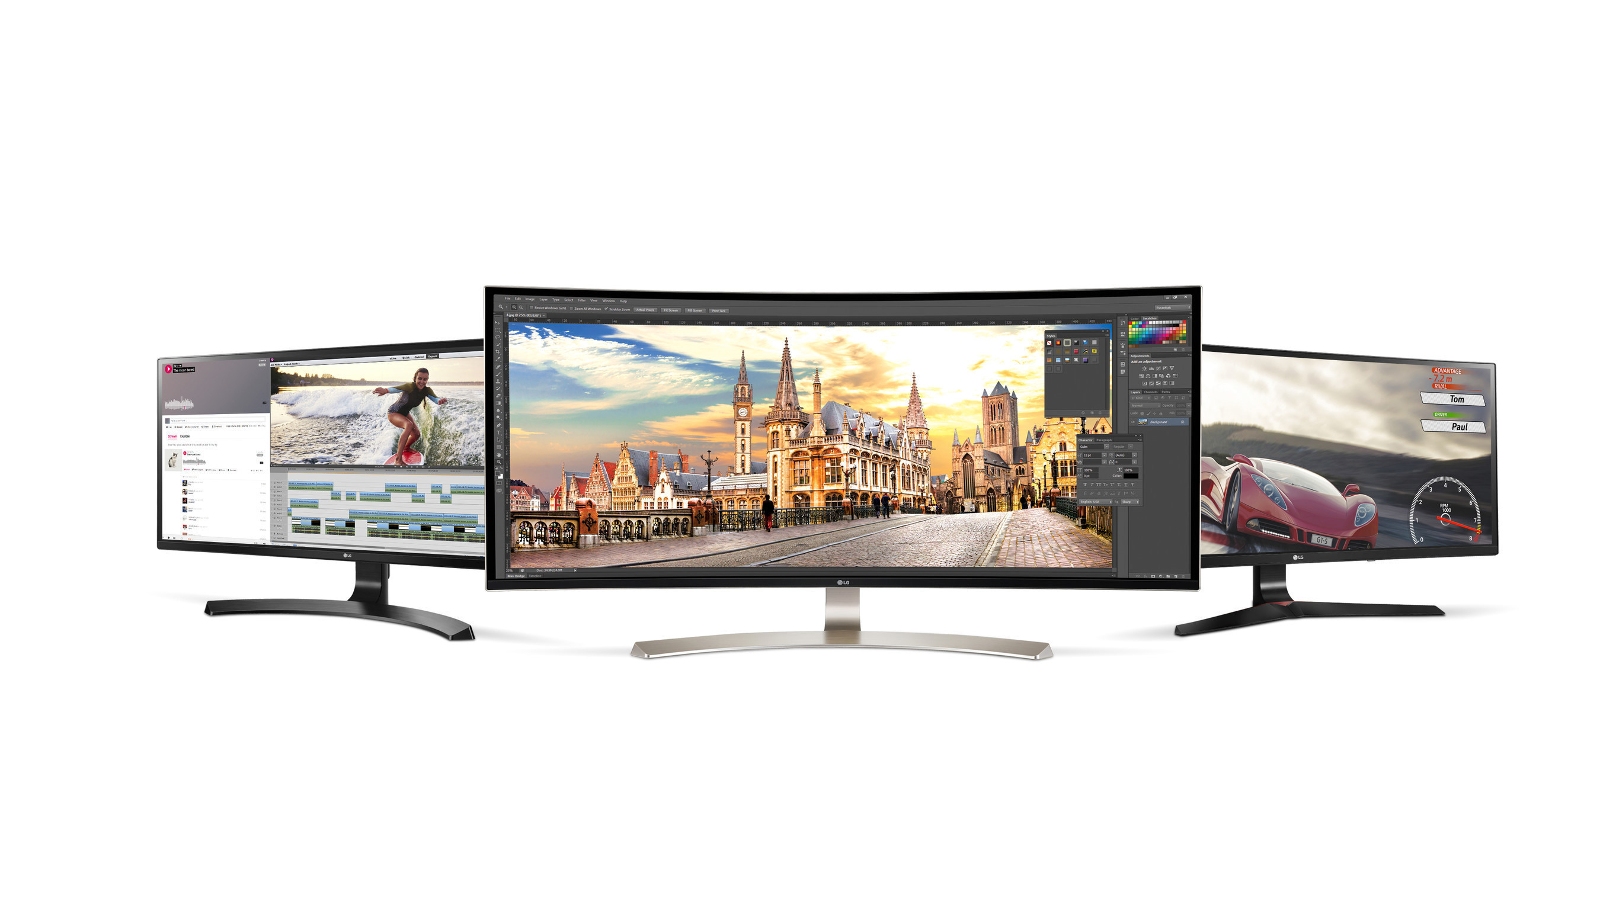 6 Reasons Why Your Next Upgrade Should Be a Second Monitor